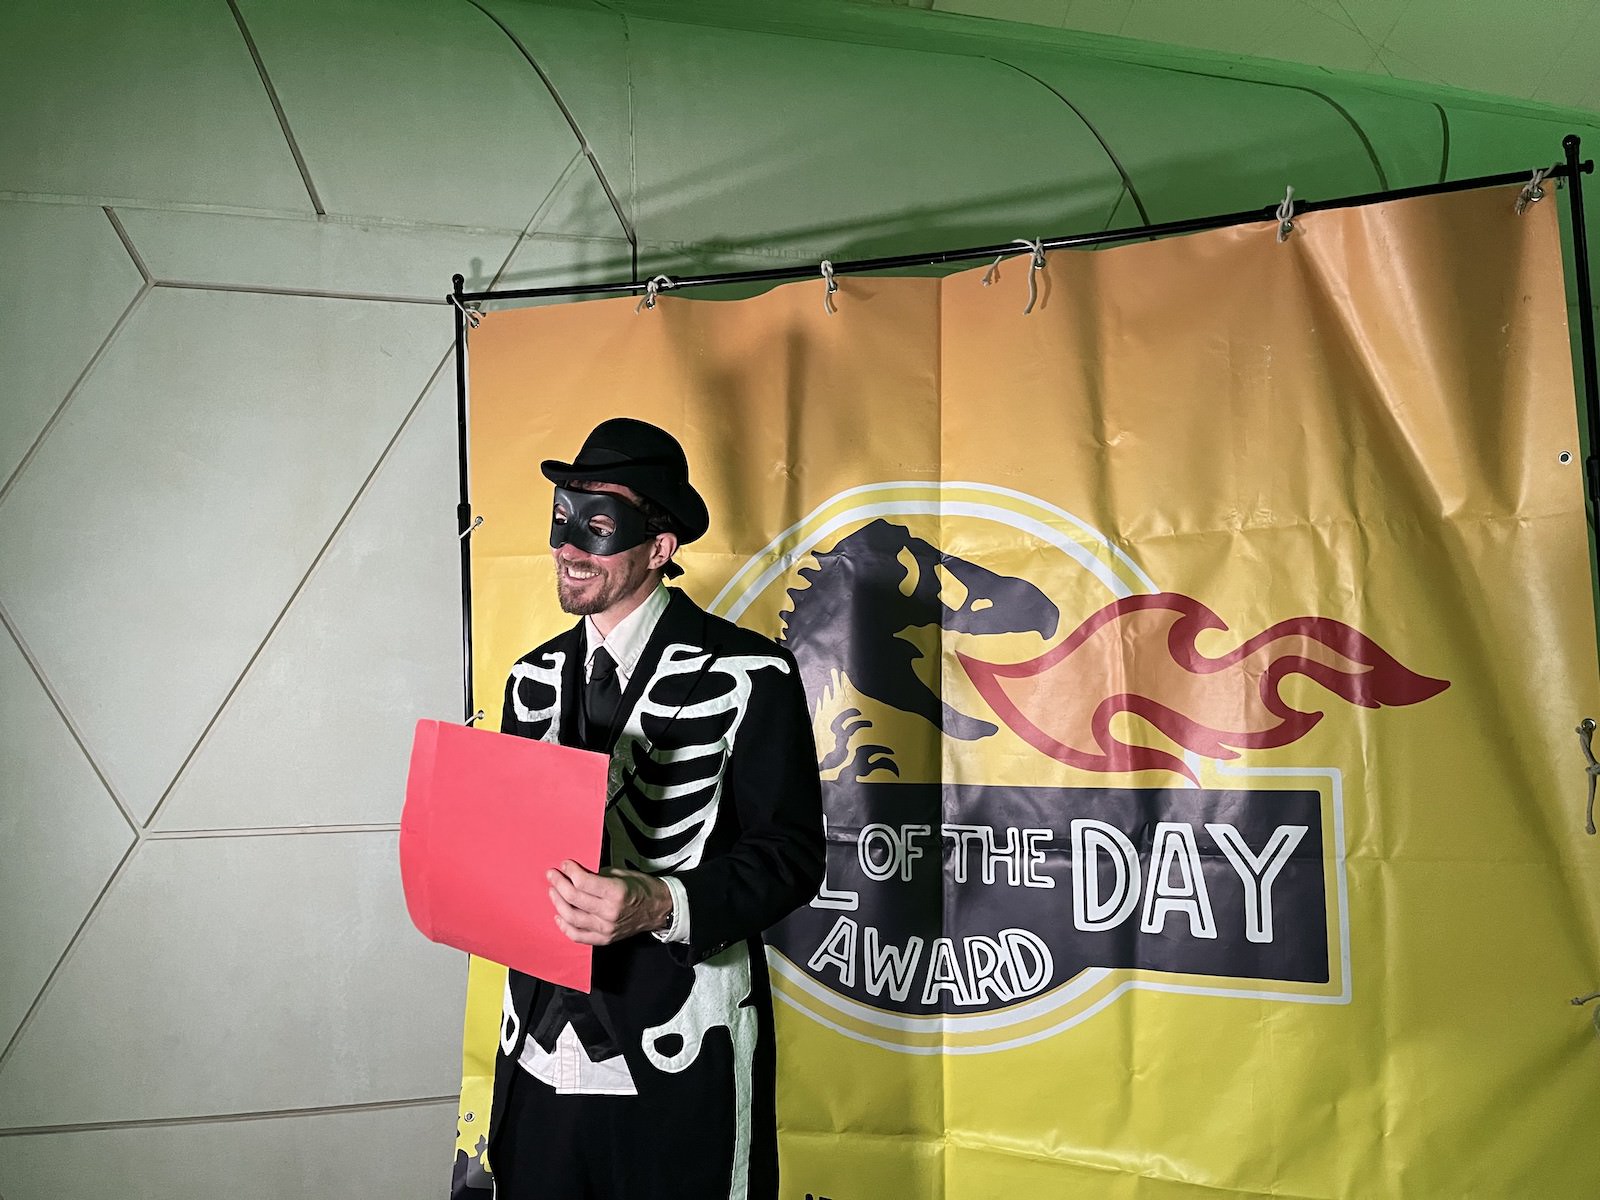 A man wears a bowler hat, black half-mask, and skeleton bone coat while holding a red sign and standing in front of a backdrop with a tyrannosaurus rex breathing fire.